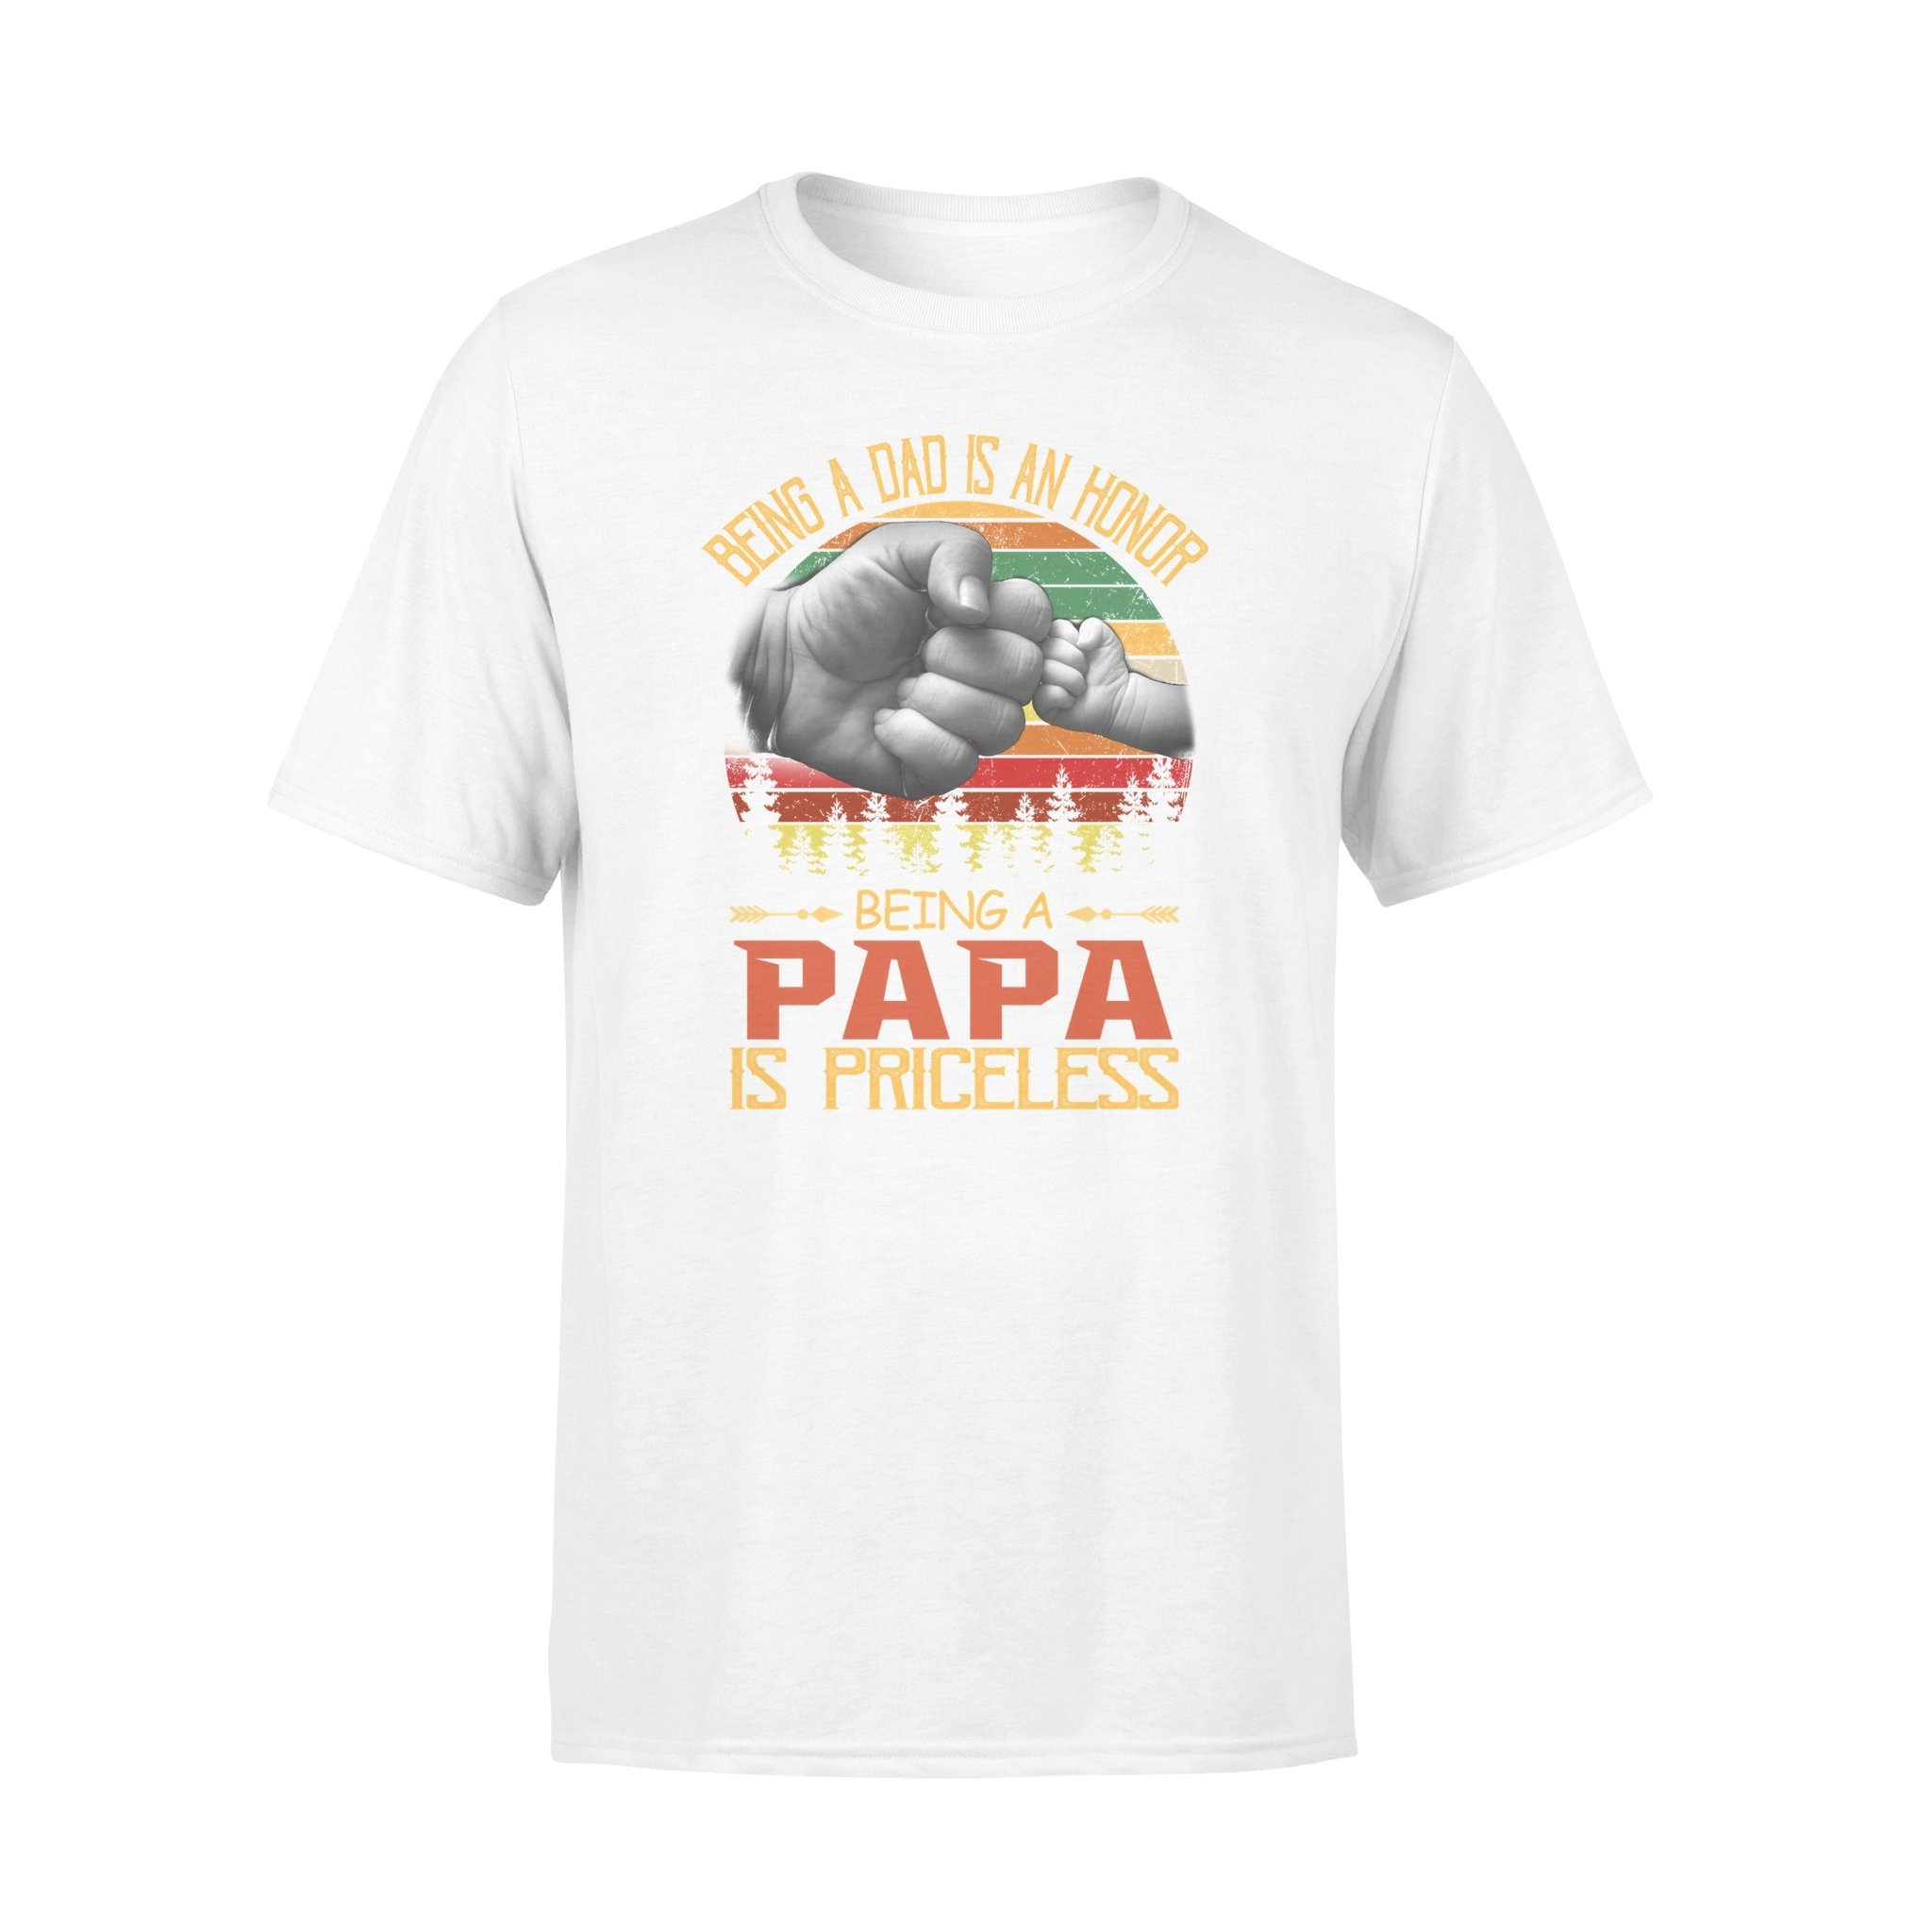 papa is priceless T shirt ? Gifts for grandpa